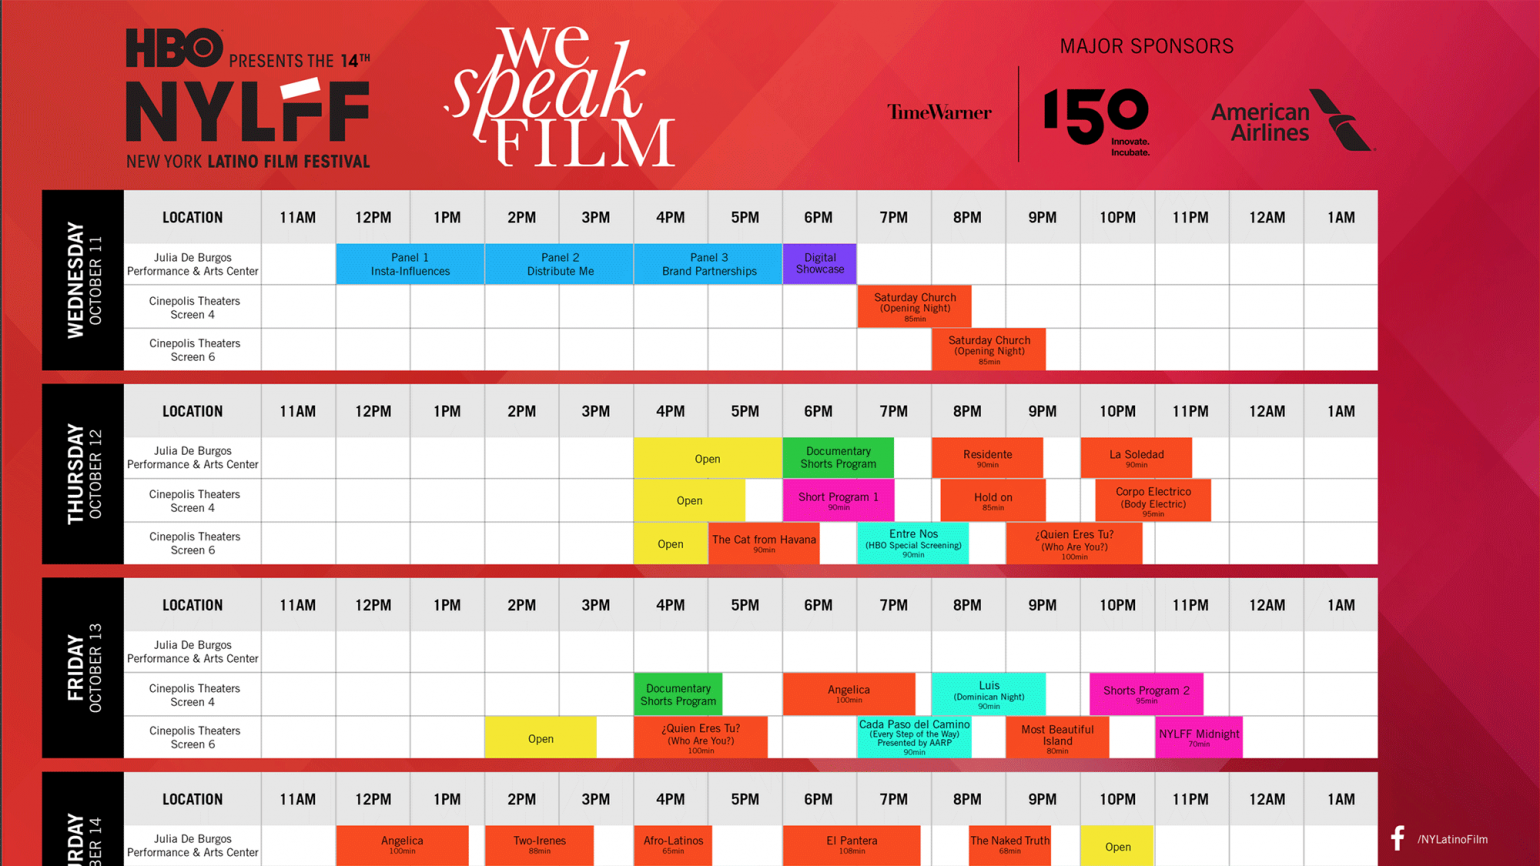 NYLFF - Downloadable schedule